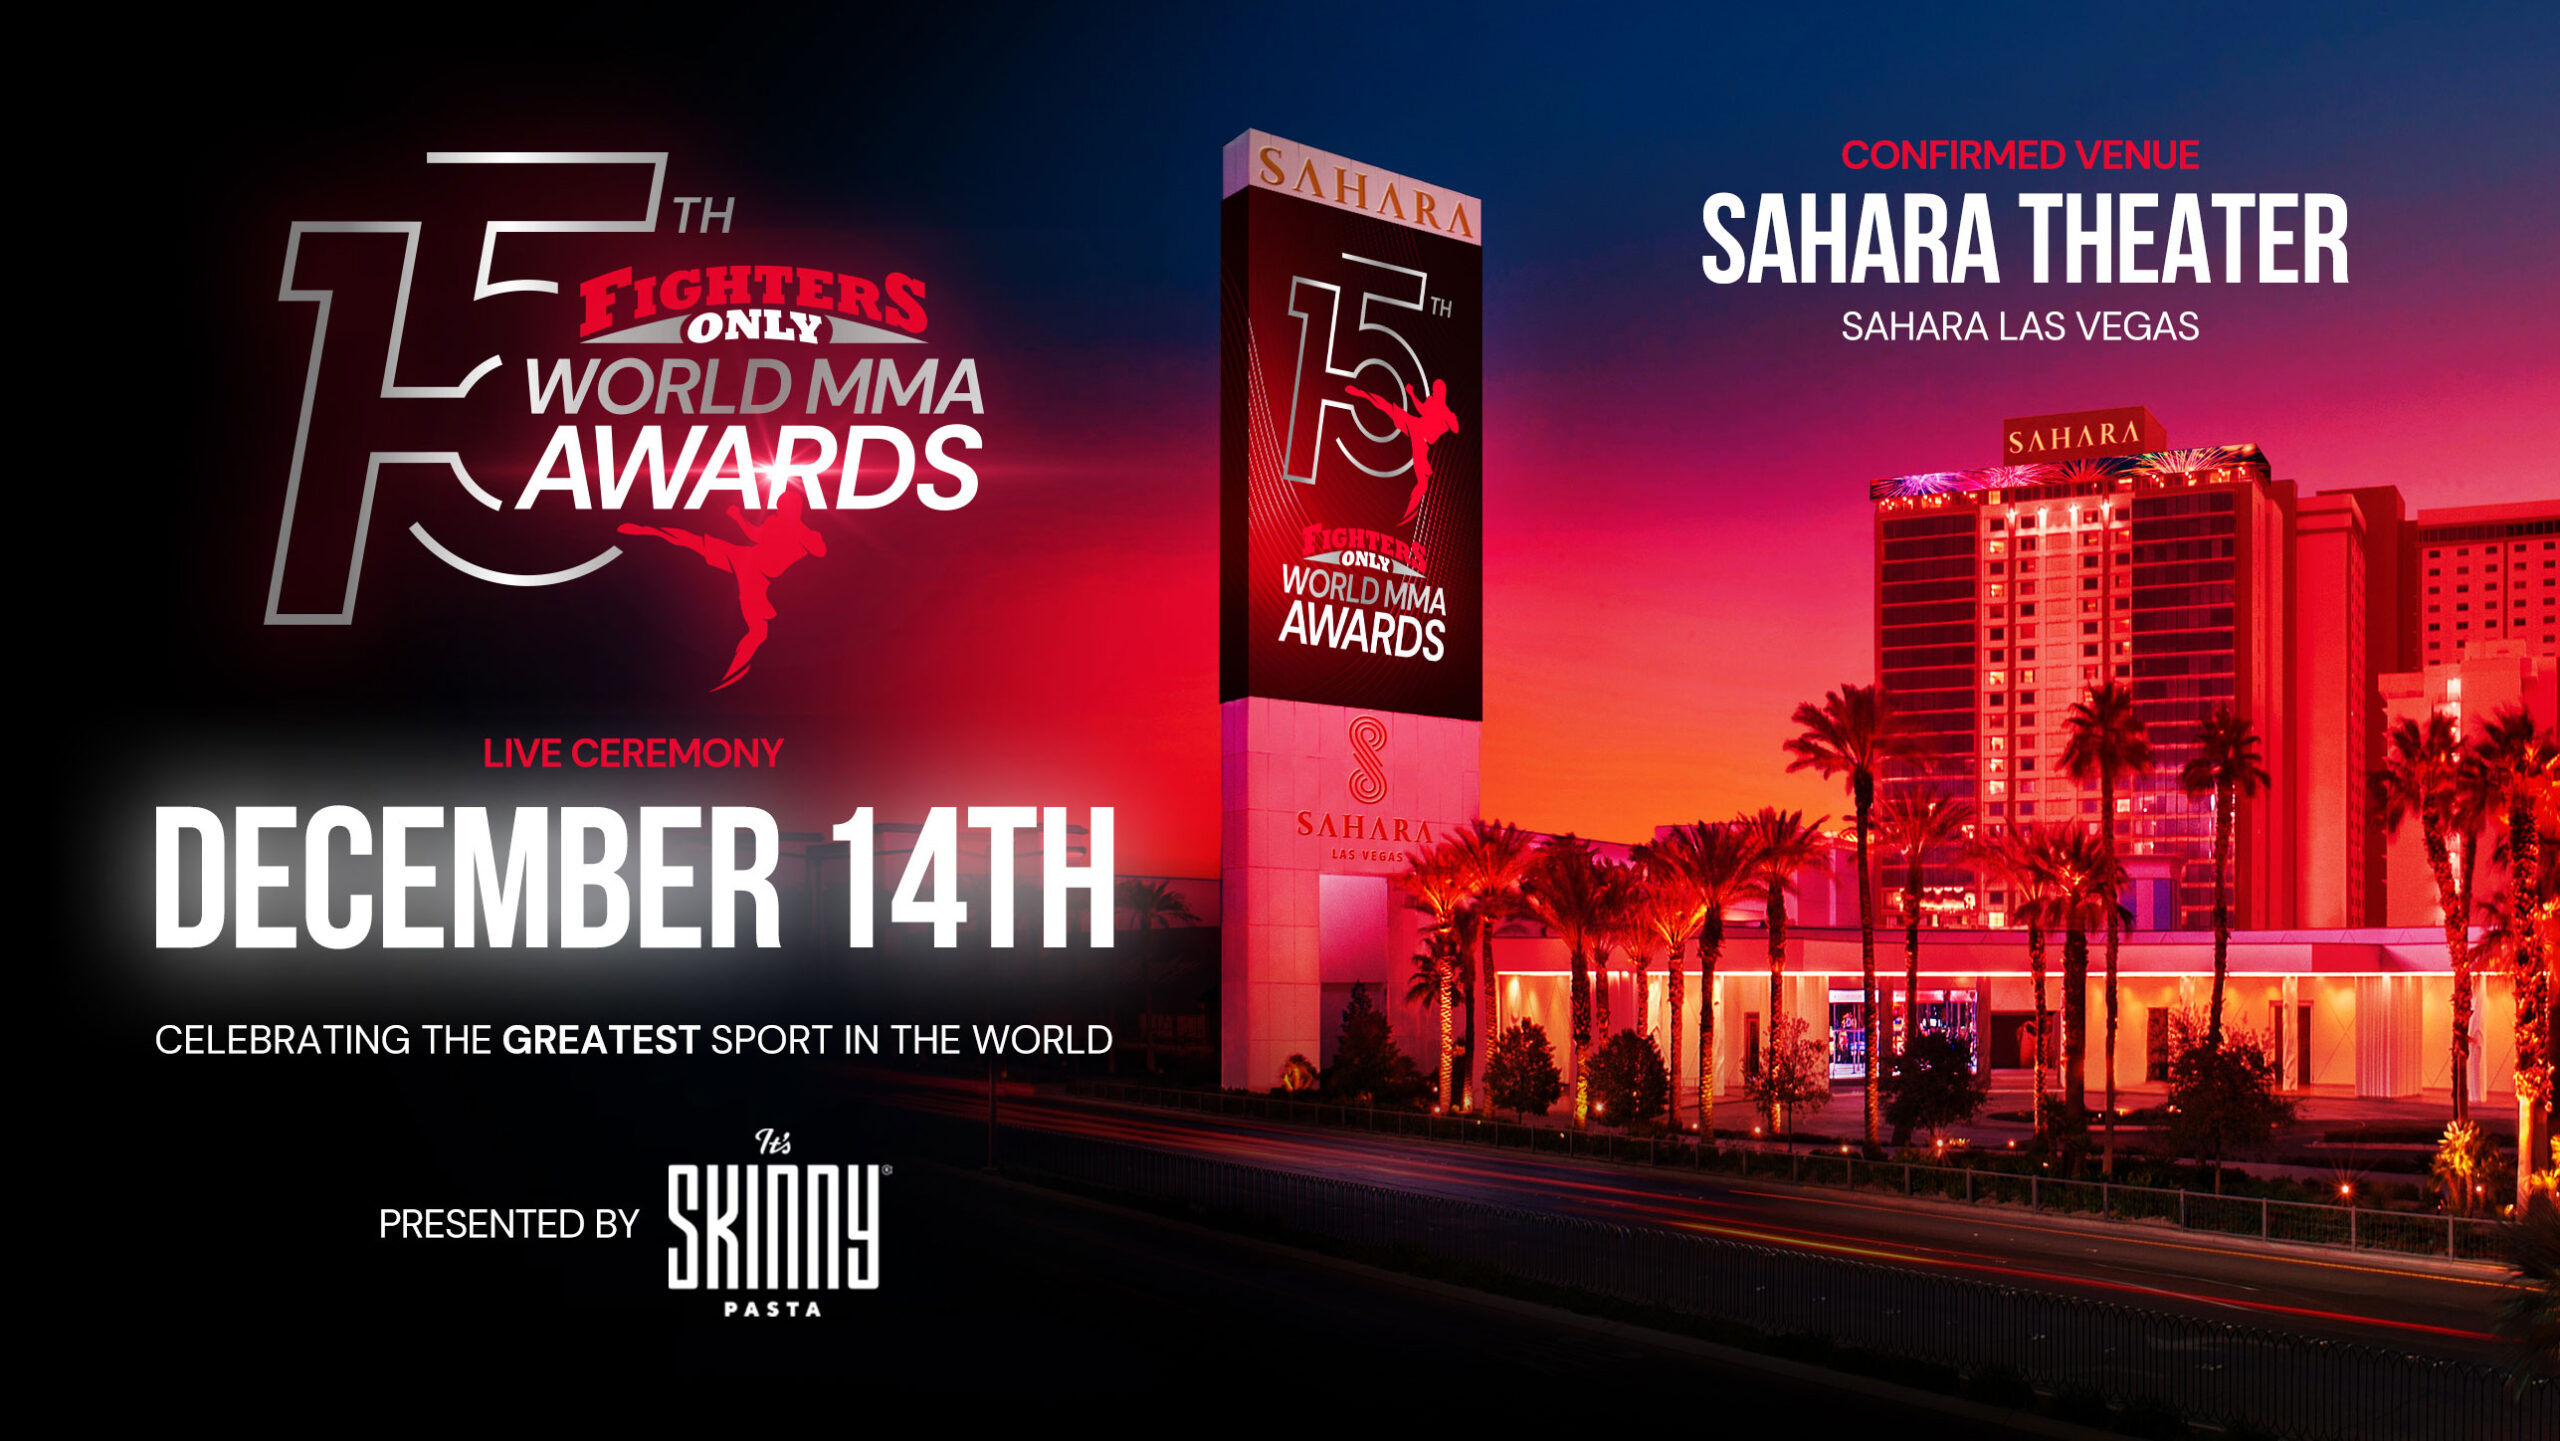 Limitless X Attends and Sponsors The 14th Annual World MMA Awards